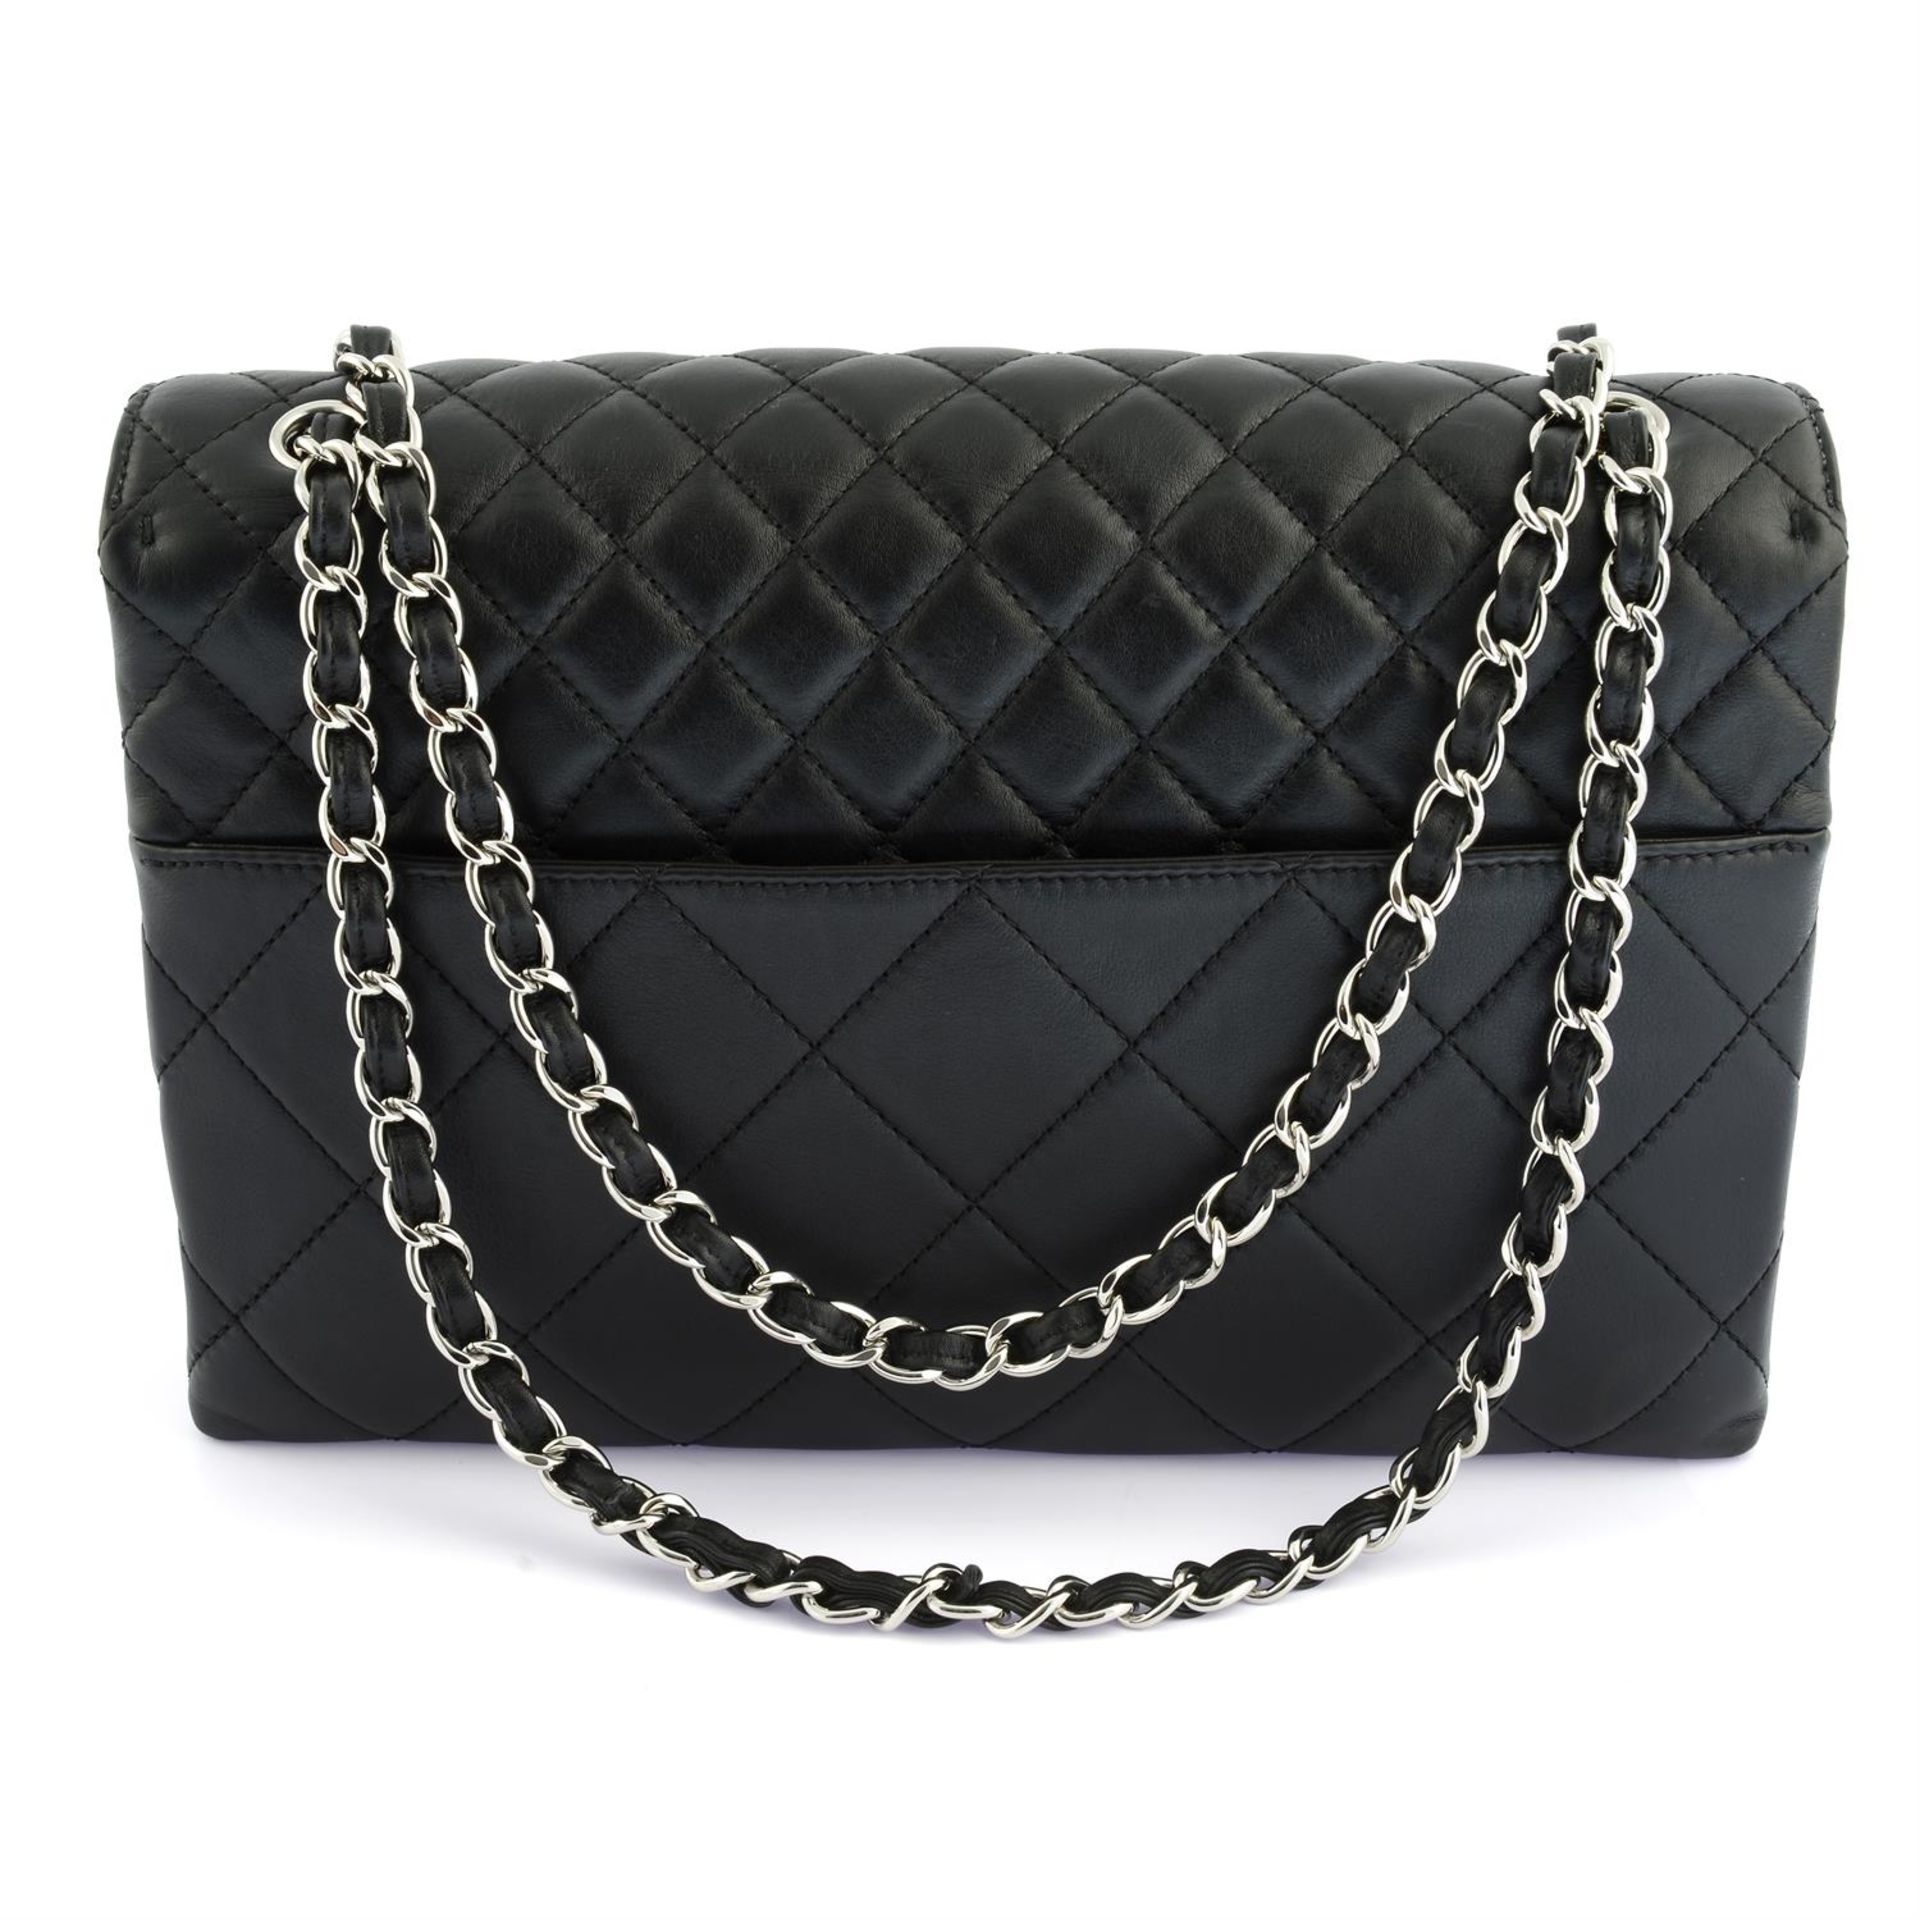 CHANEL - a black Calfskin leather Business flap bag. - Image 2 of 6